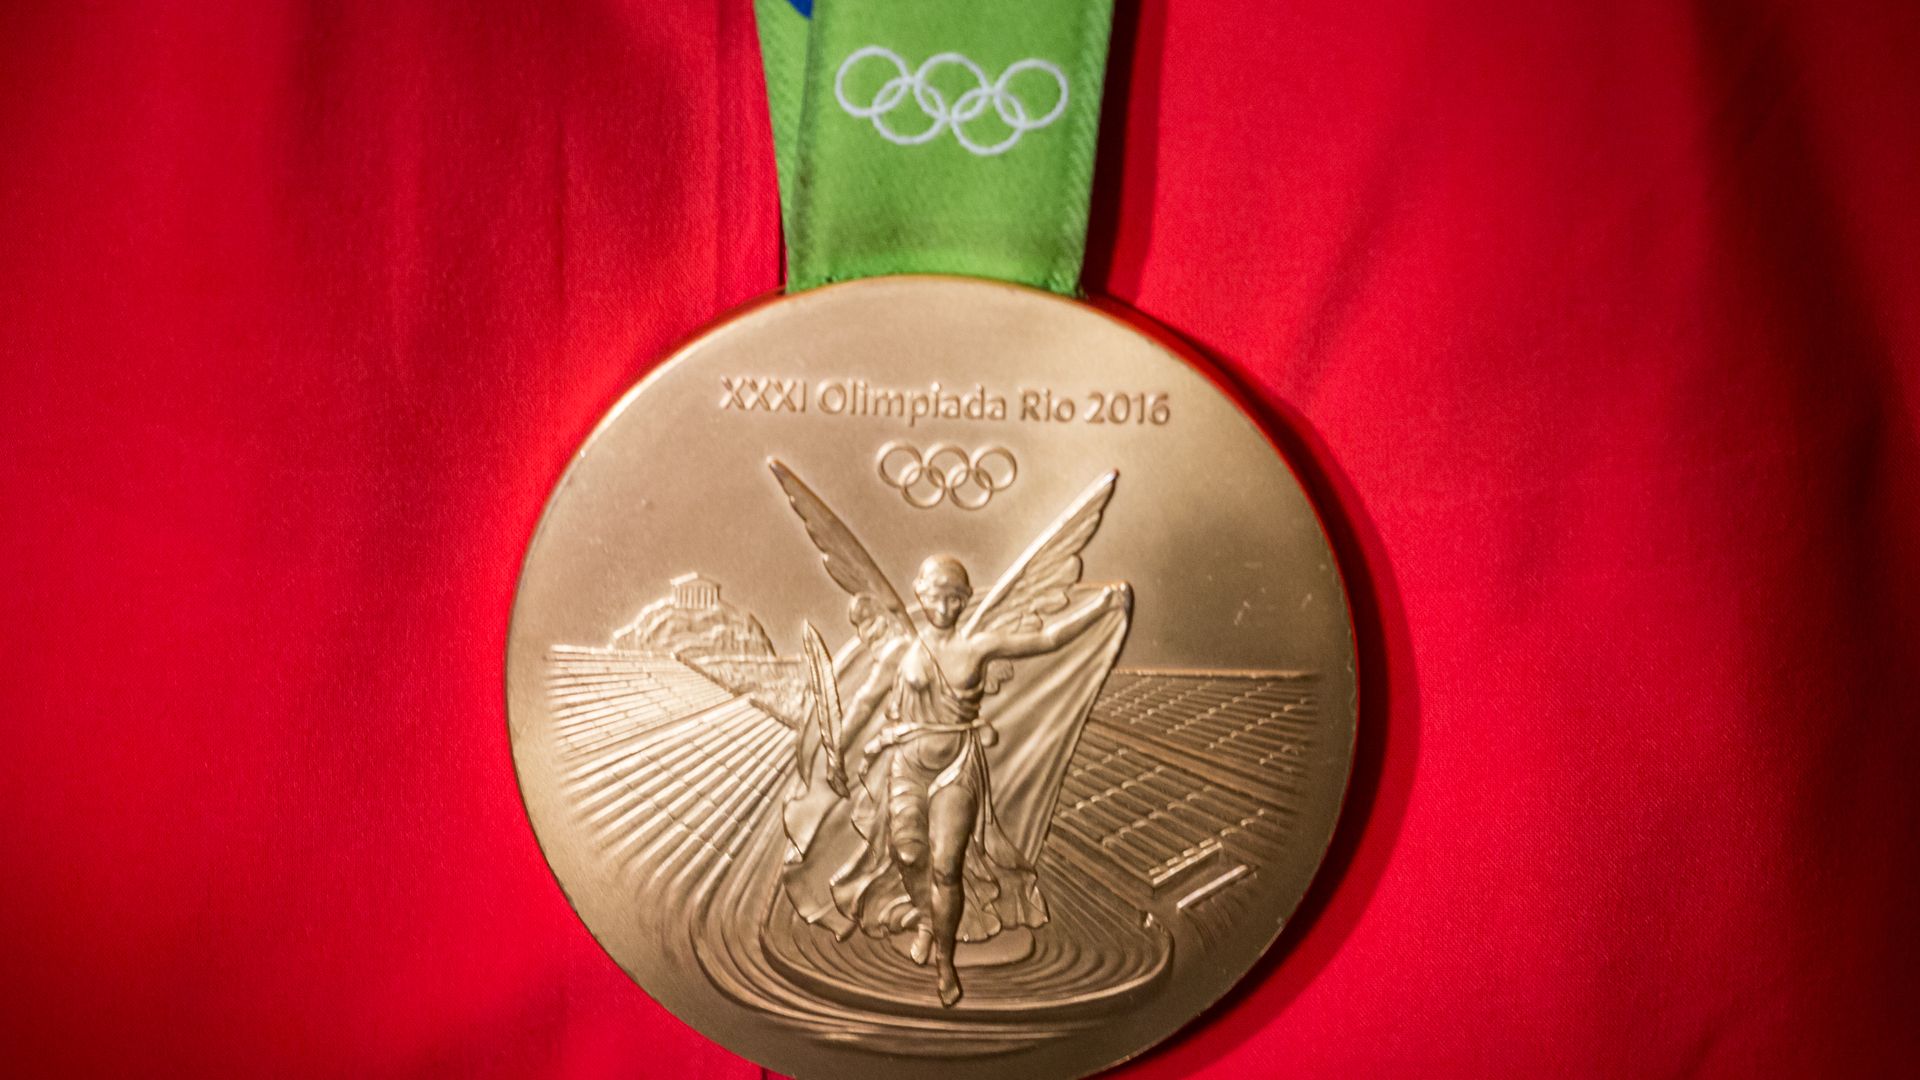 Photo of a bronze Olympic medal against a red jacket